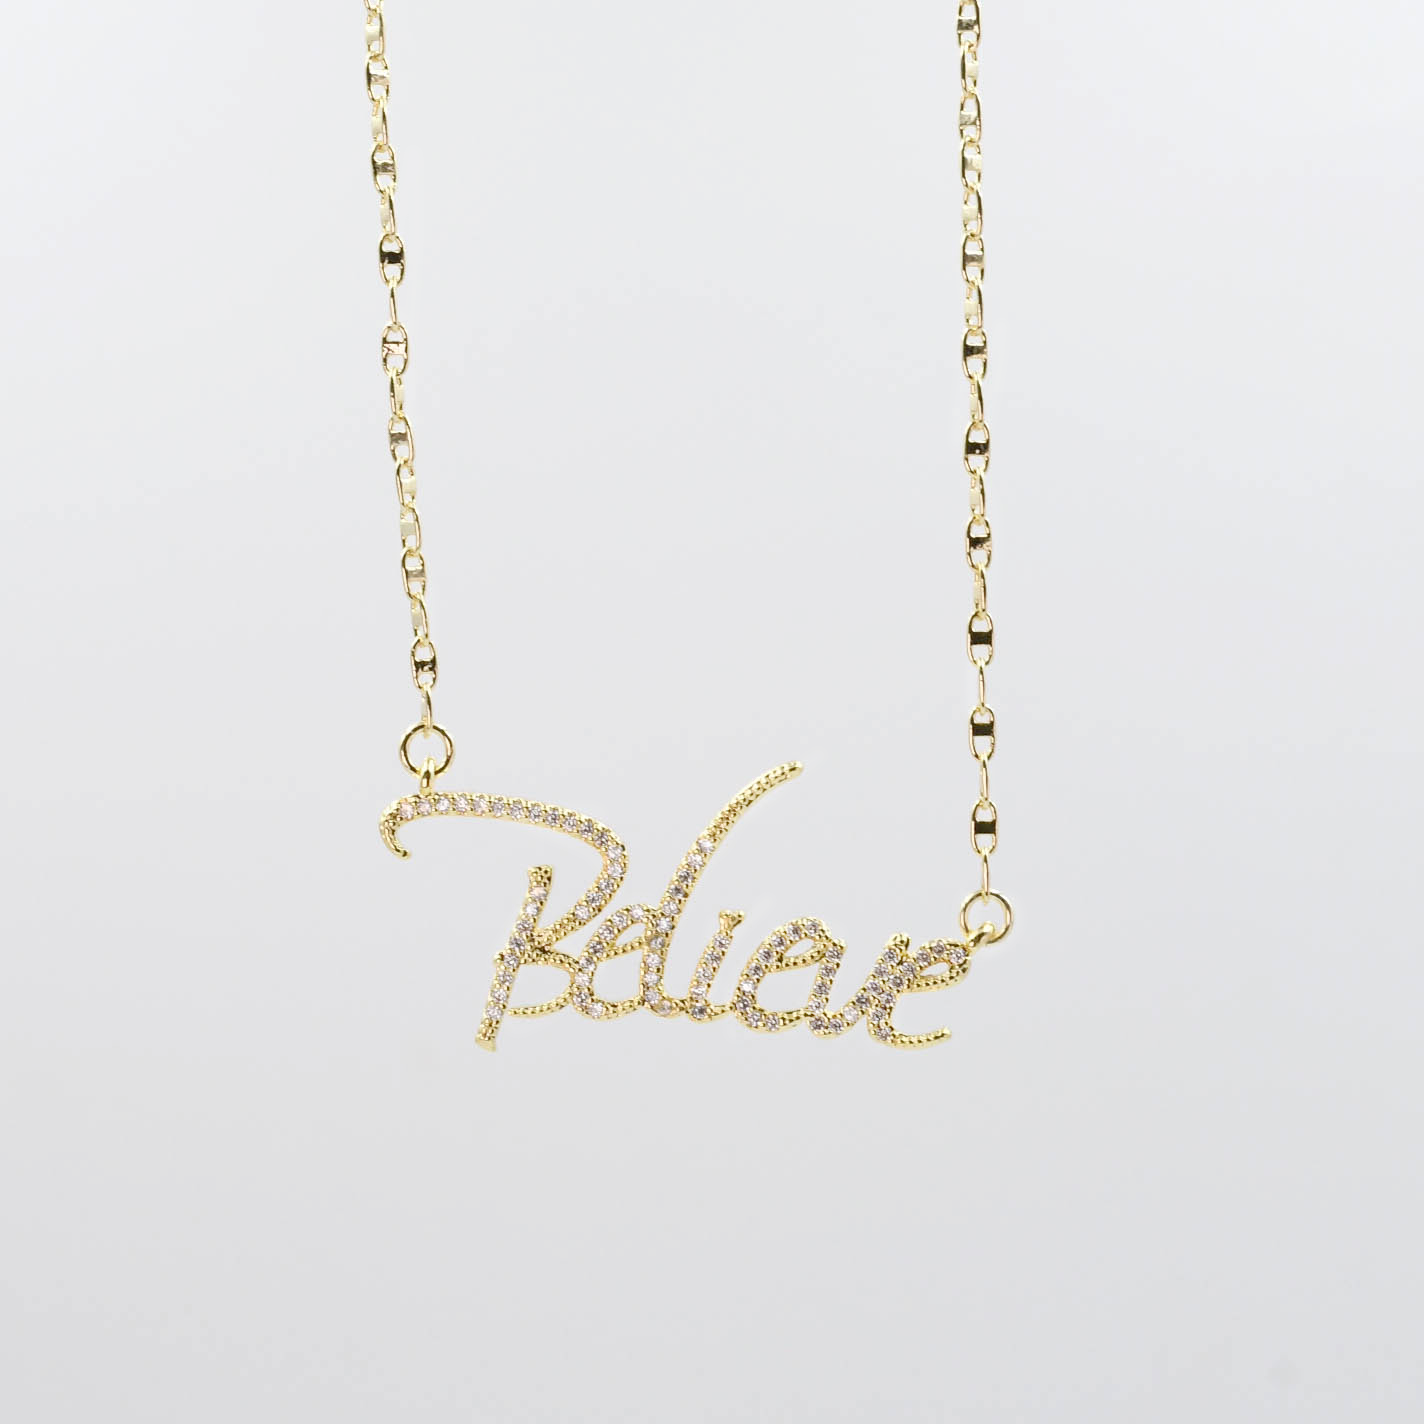 Believe 14K Gold-Plated Necklace